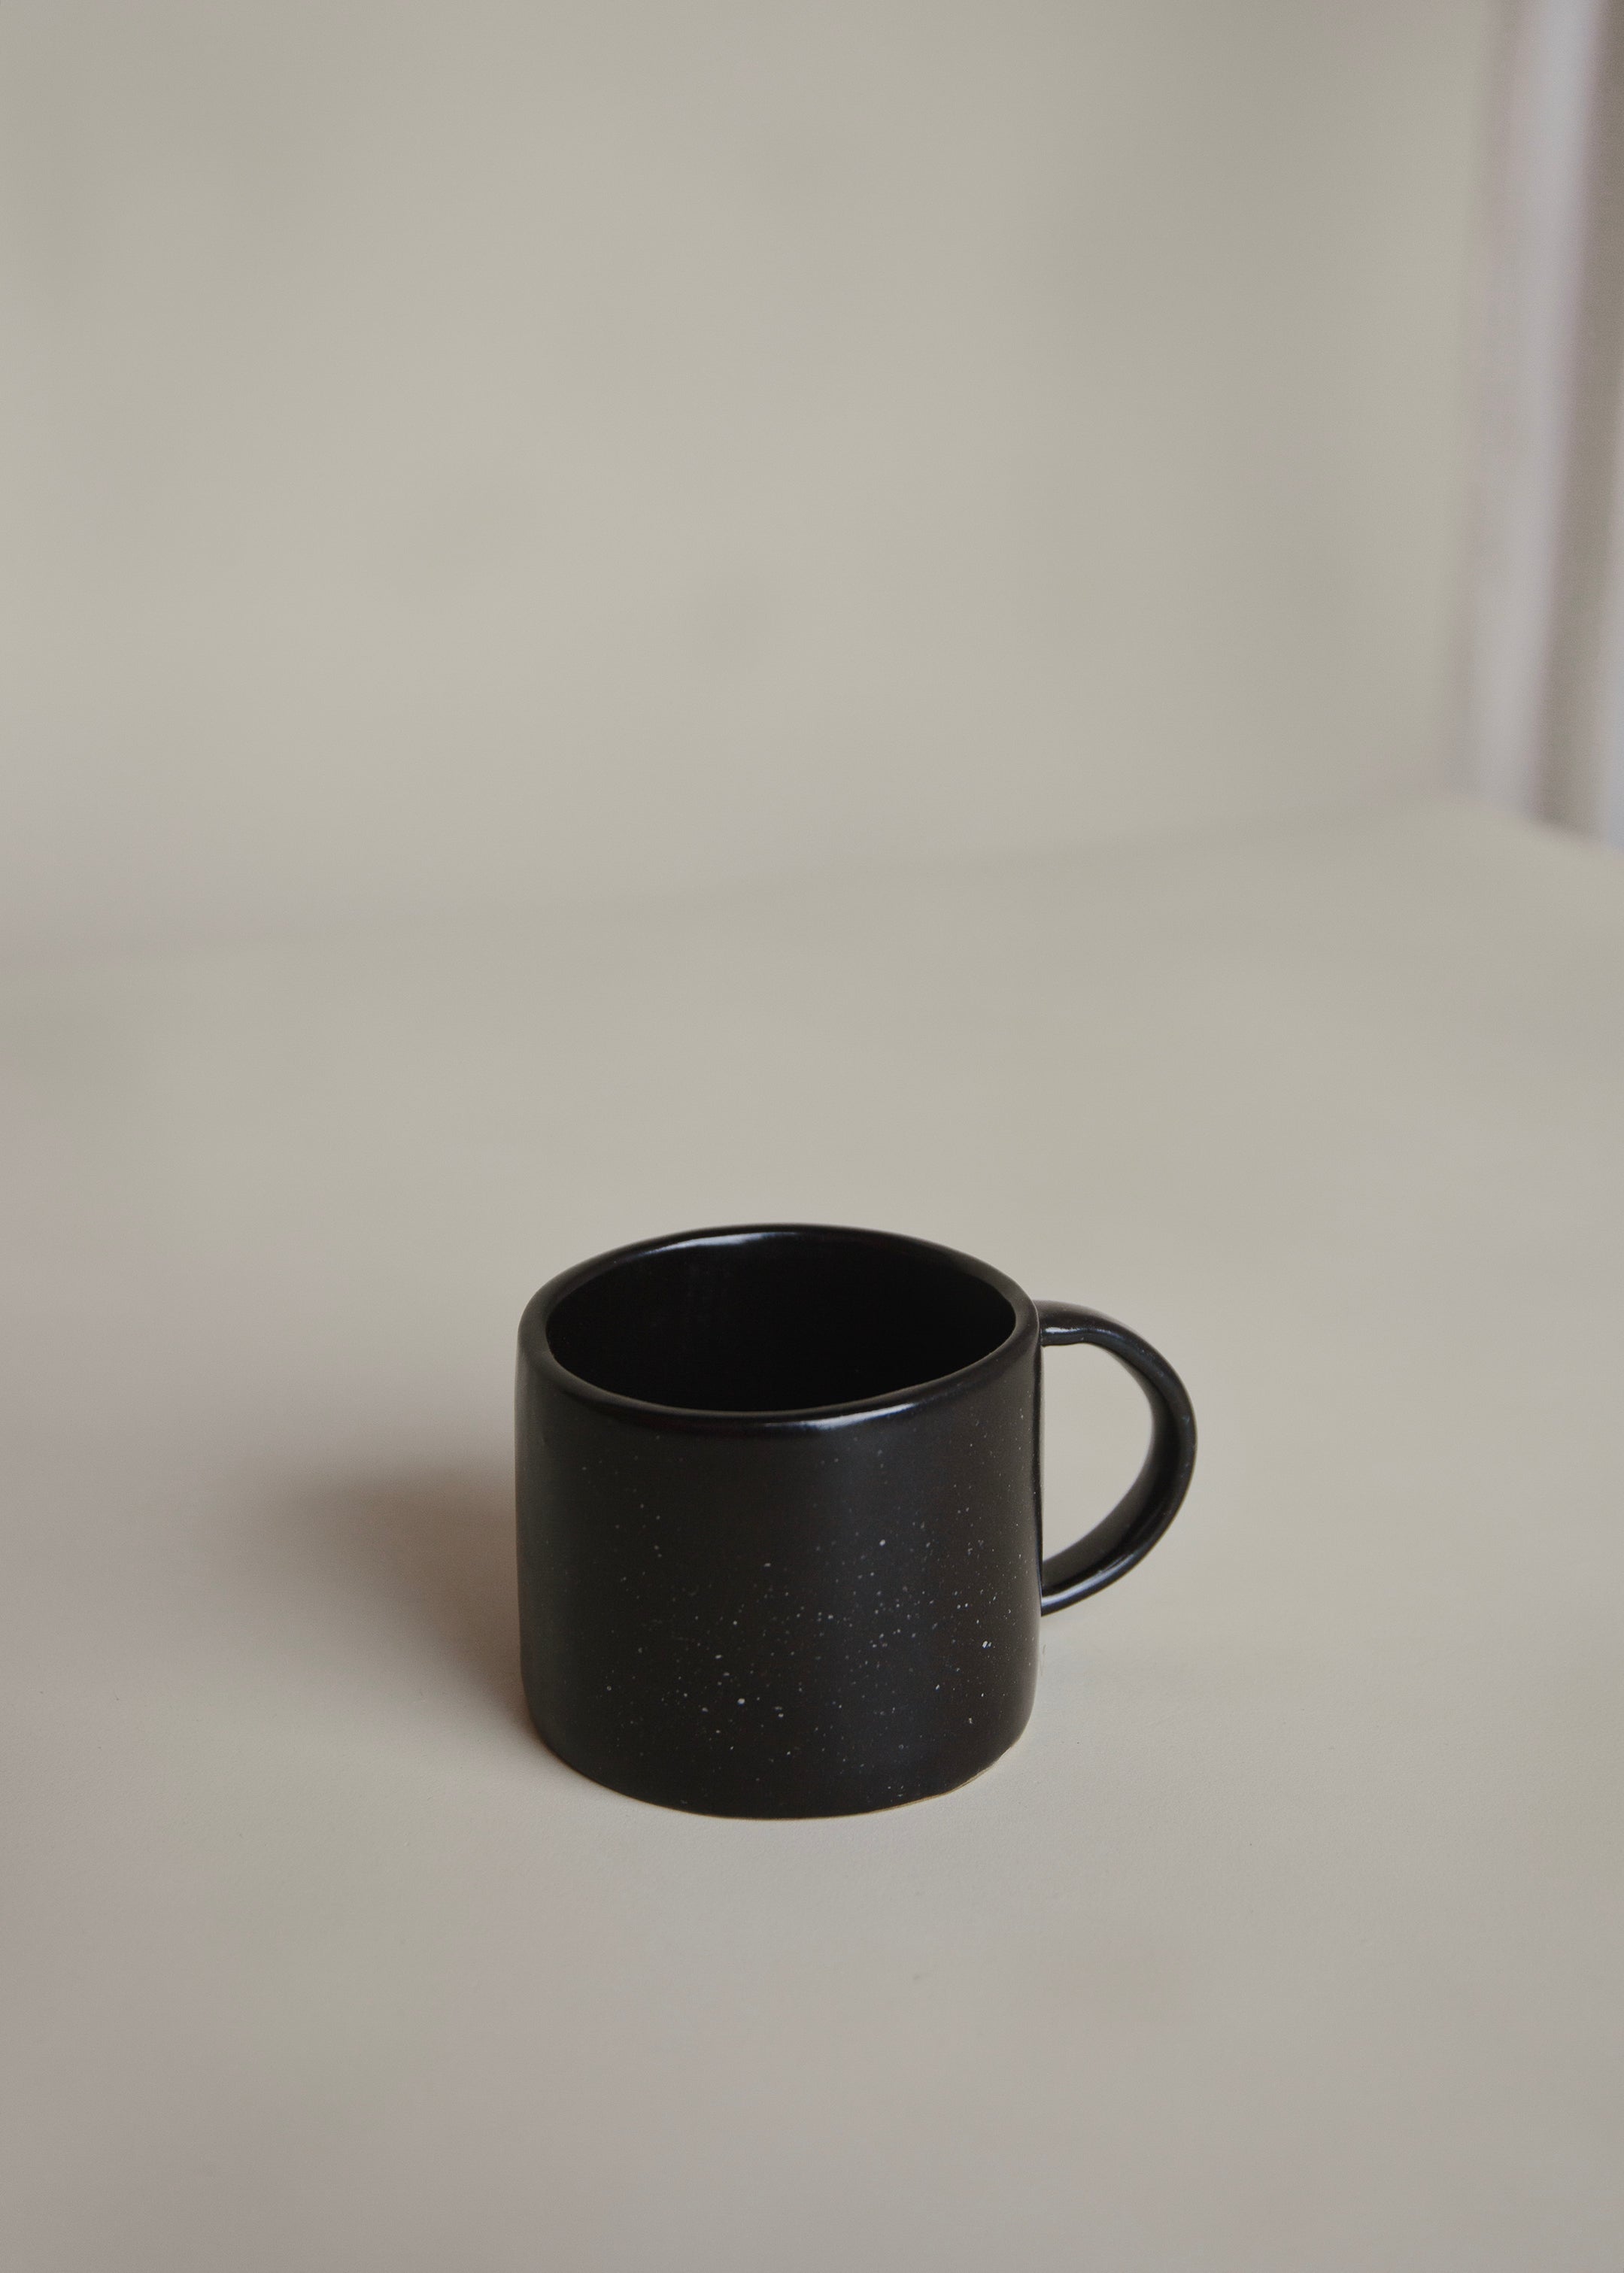 Agni Cup / Speckled Black